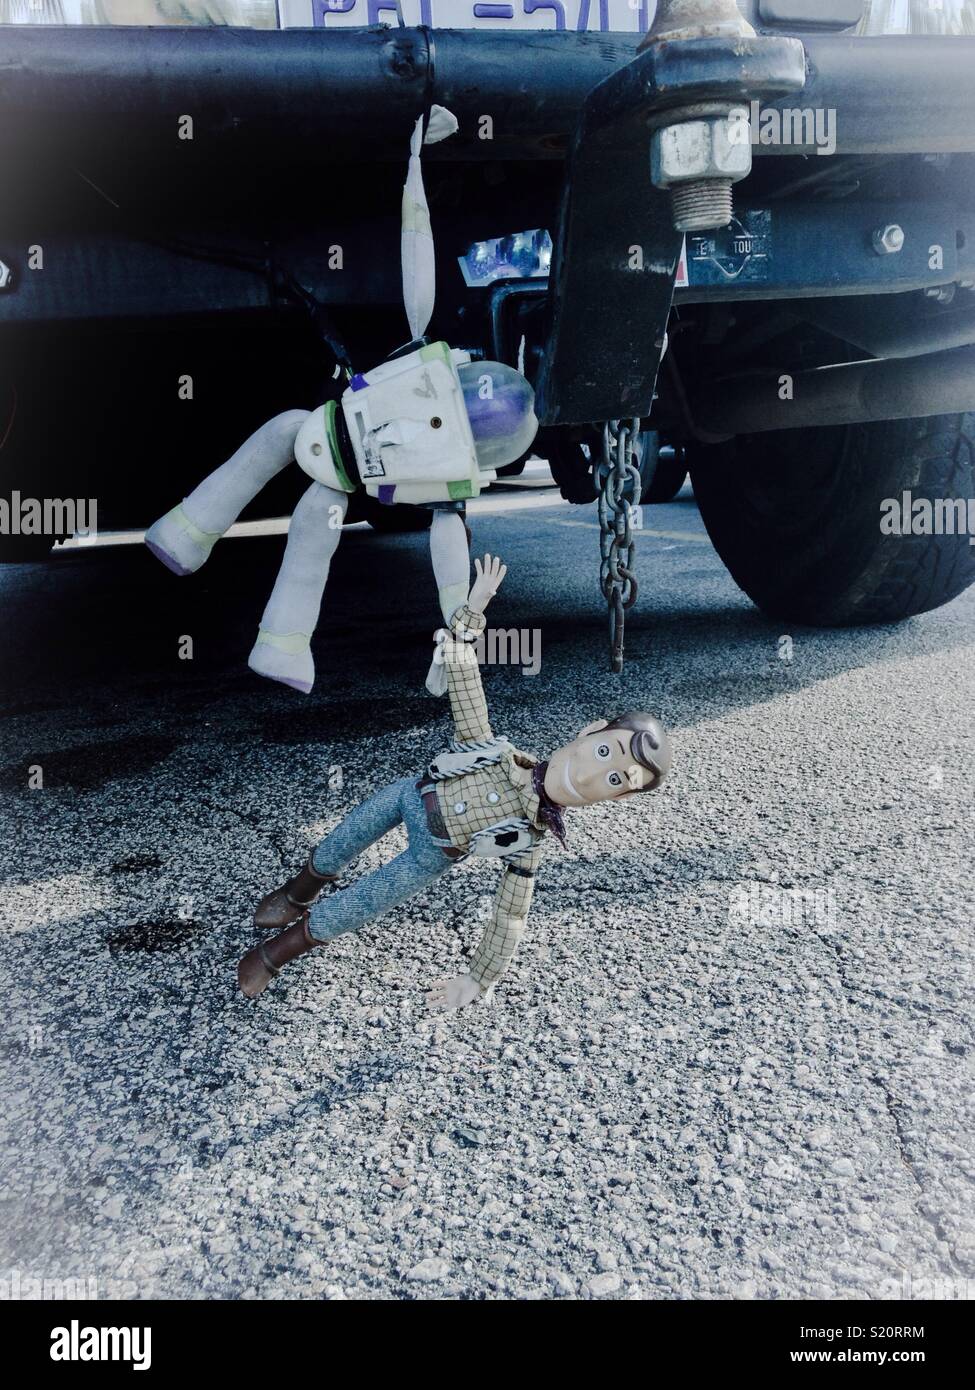 Buzz Lightyear and Woody toys 'clinging' to car bumper- seen in parking lot in North Carolina Stock Photo